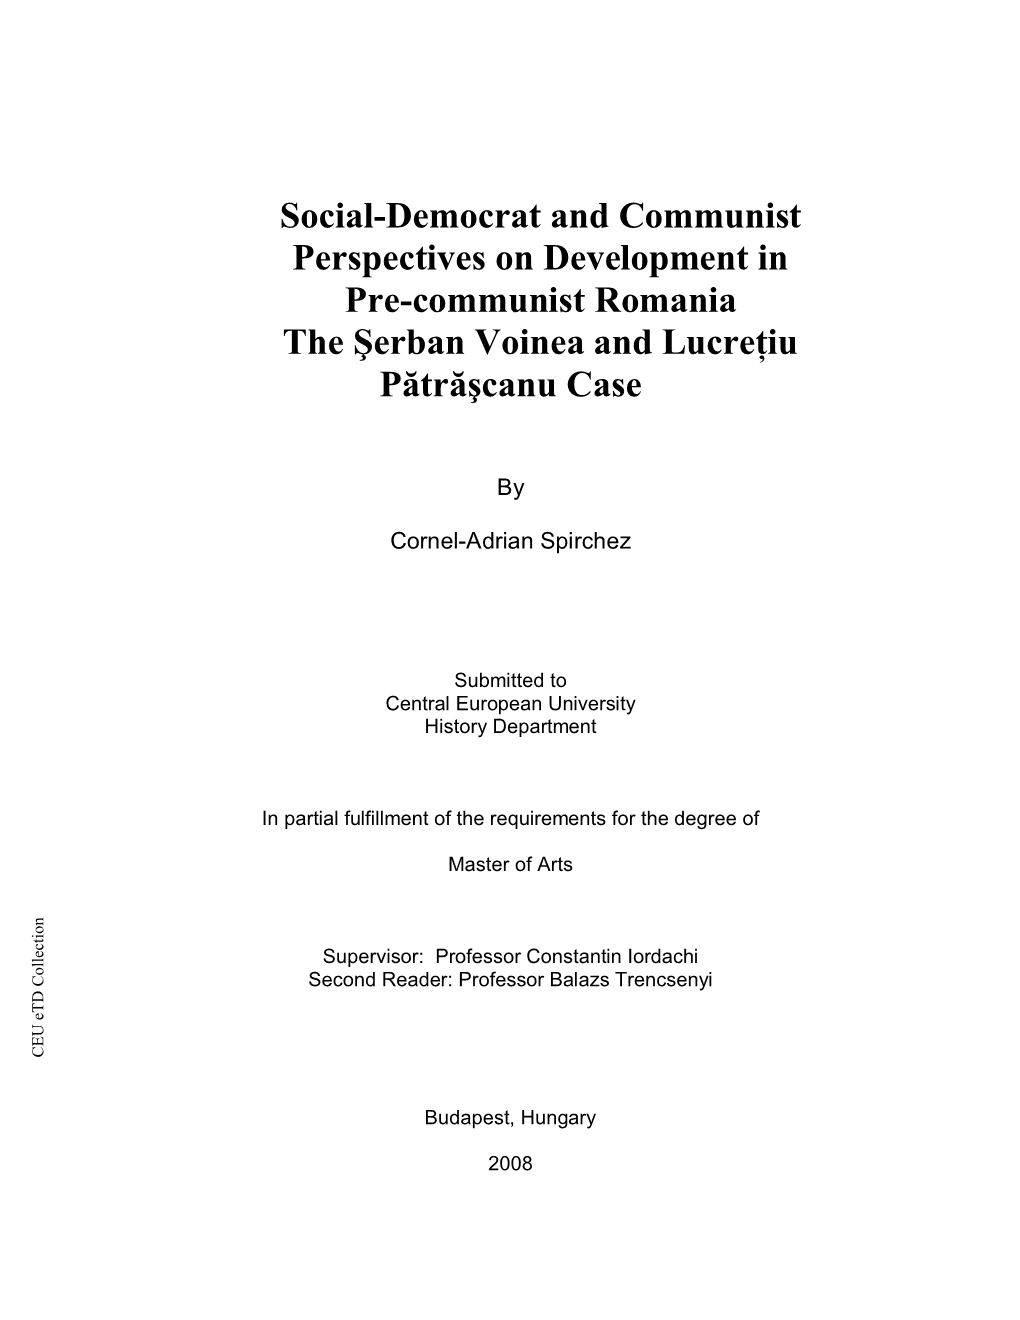 The Social-Democrat and Communist Perspectives on Social Change